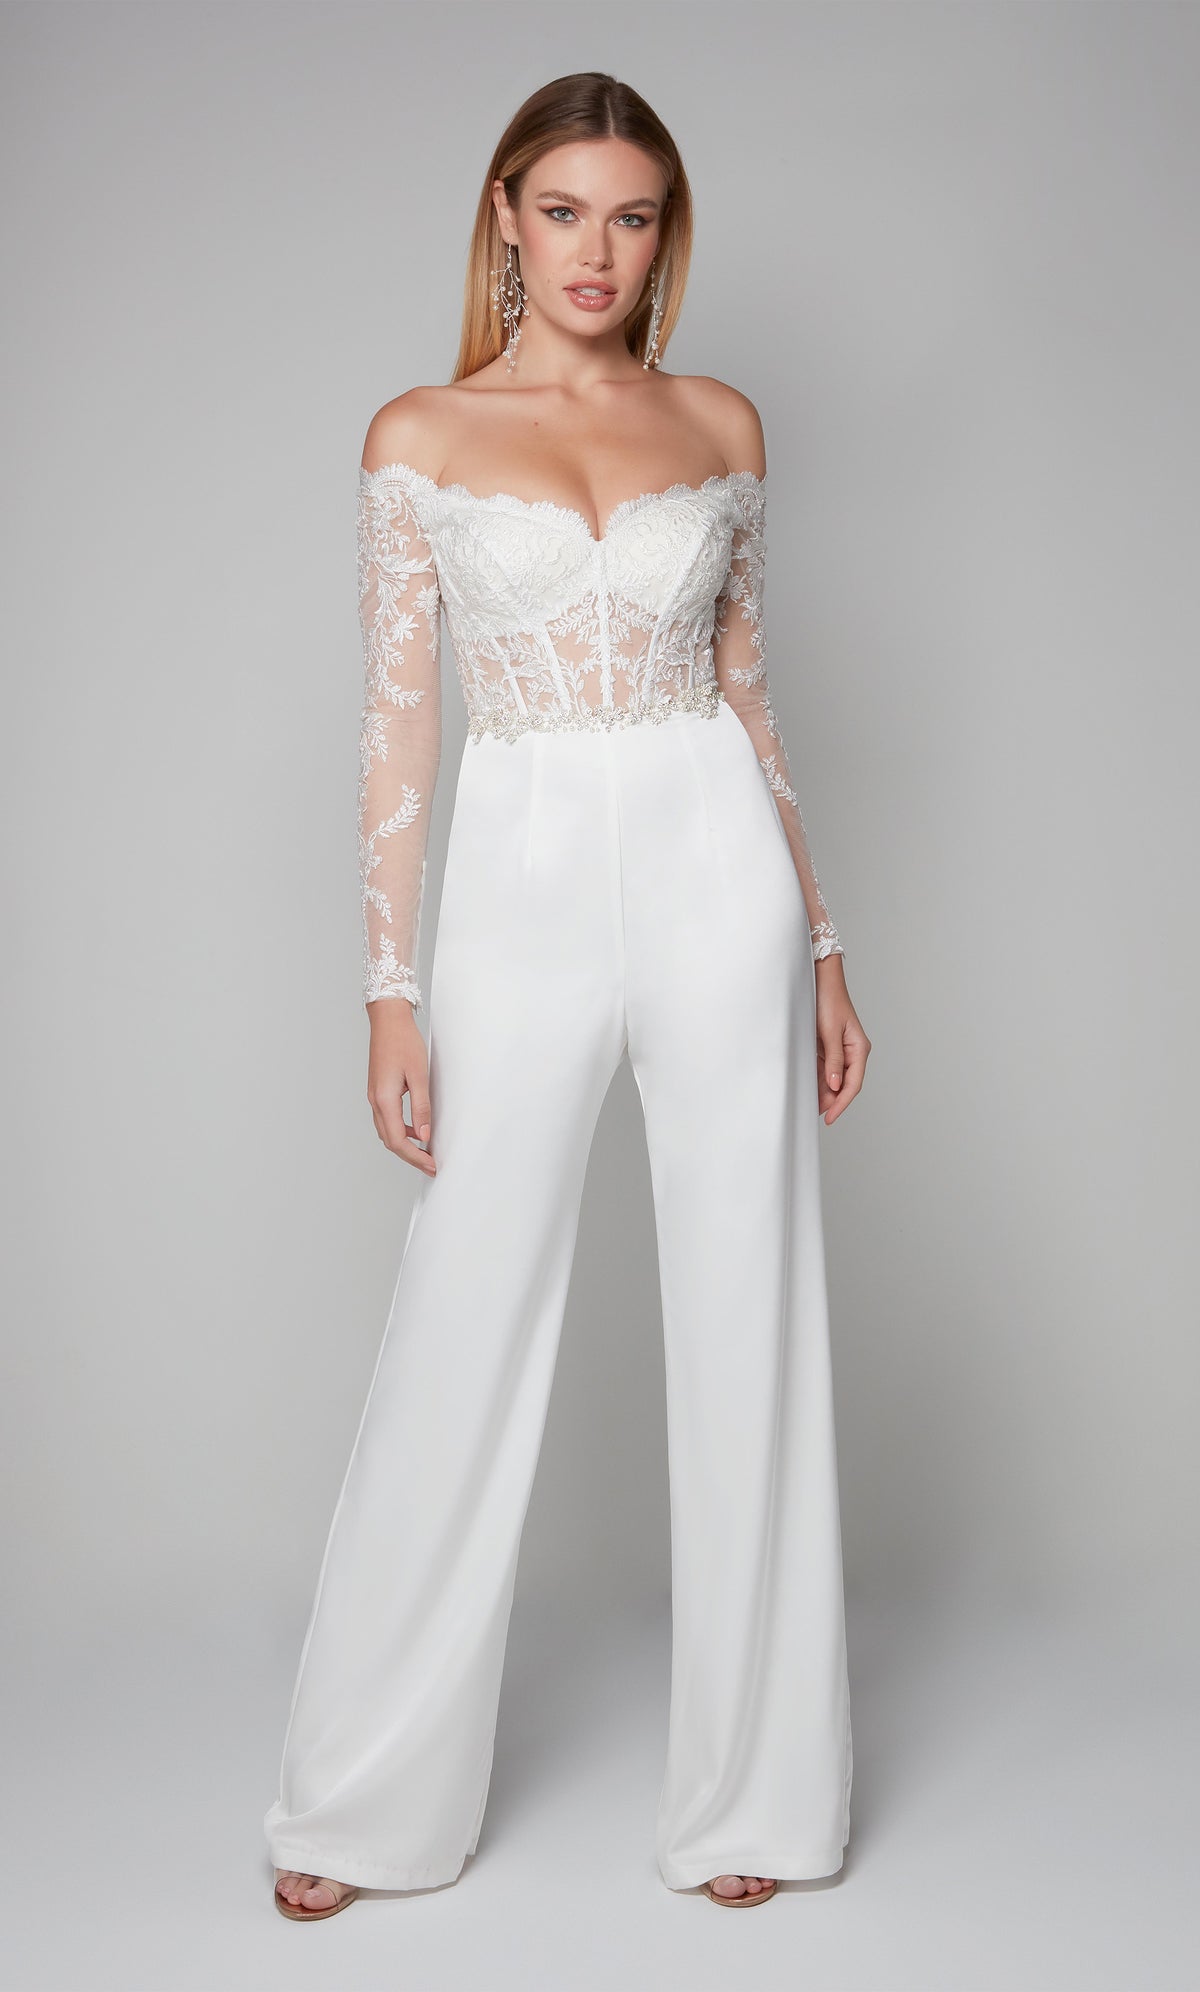 White long sleeve jumpsuit with a sheer lace off the shoulder corset bodice.